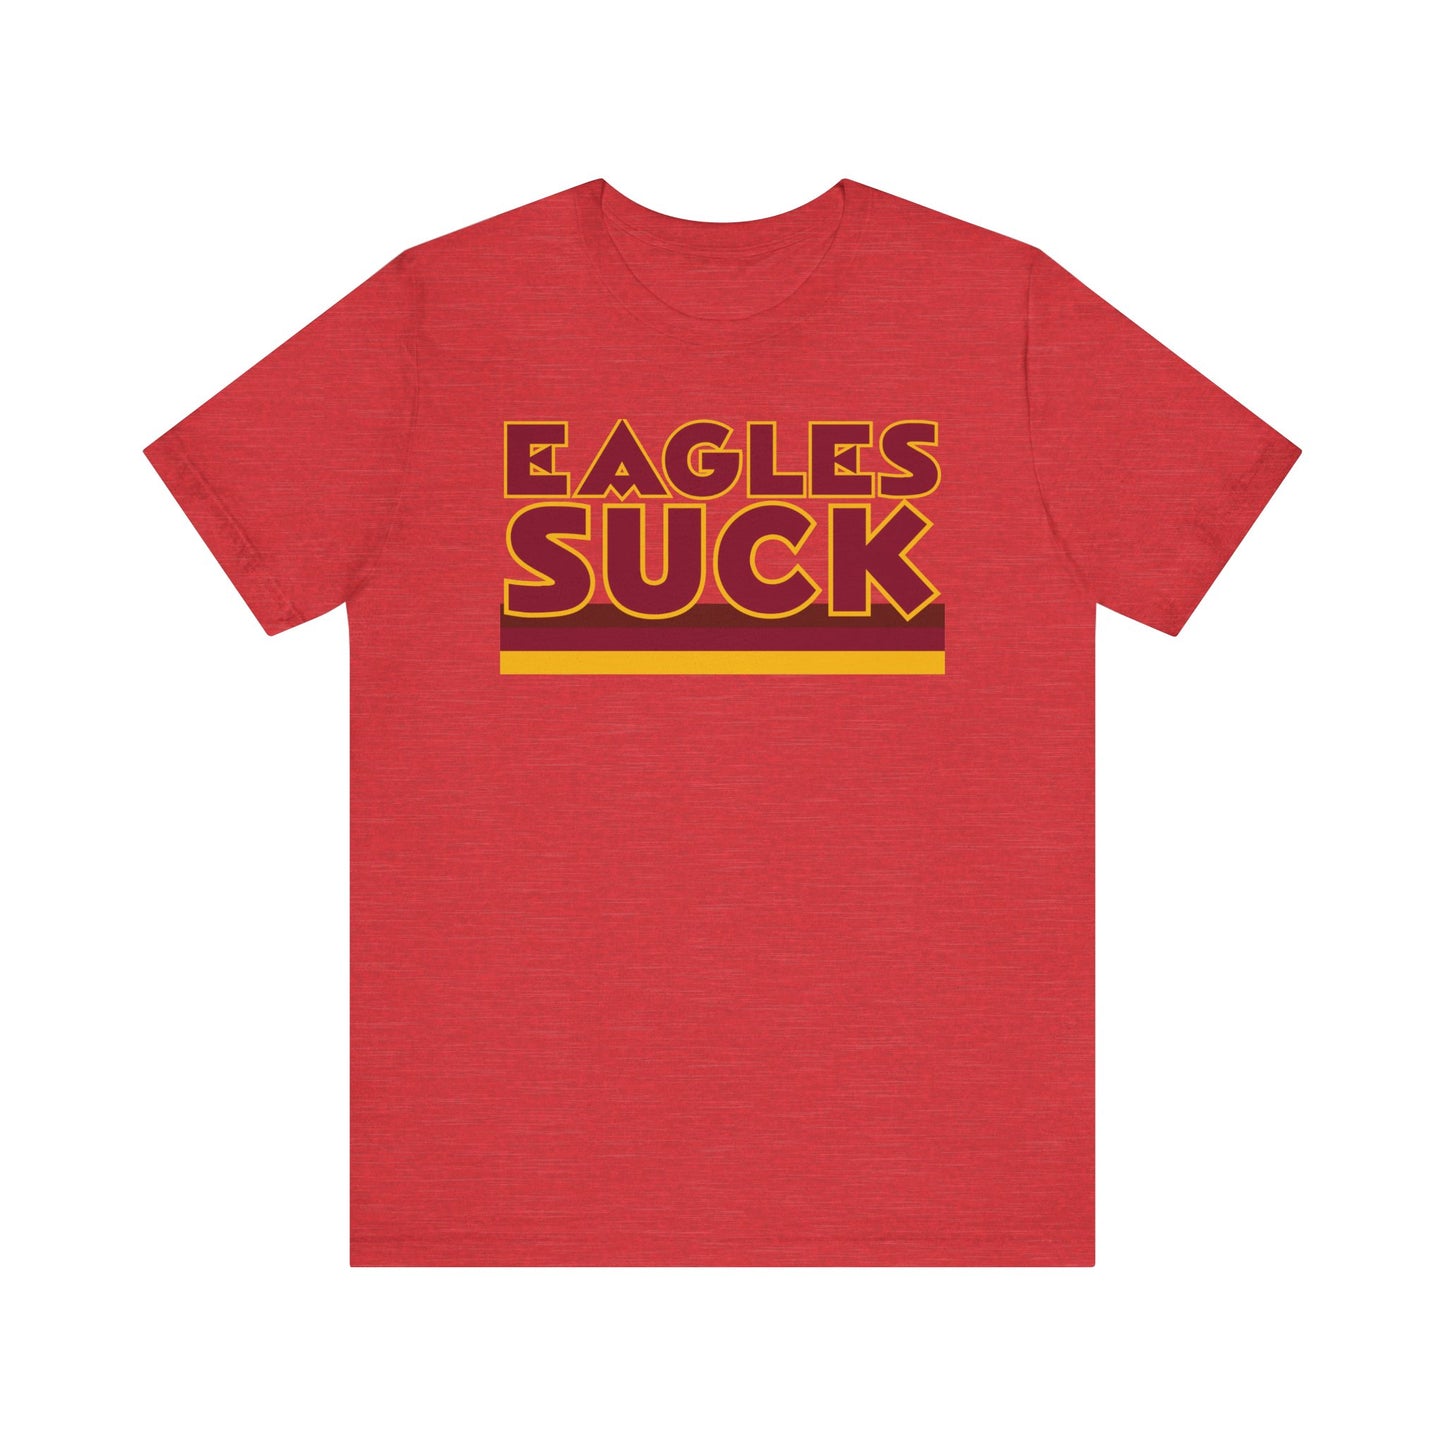 That Birdy Team in PA - Unisex Jersey Short Sleeve Tee